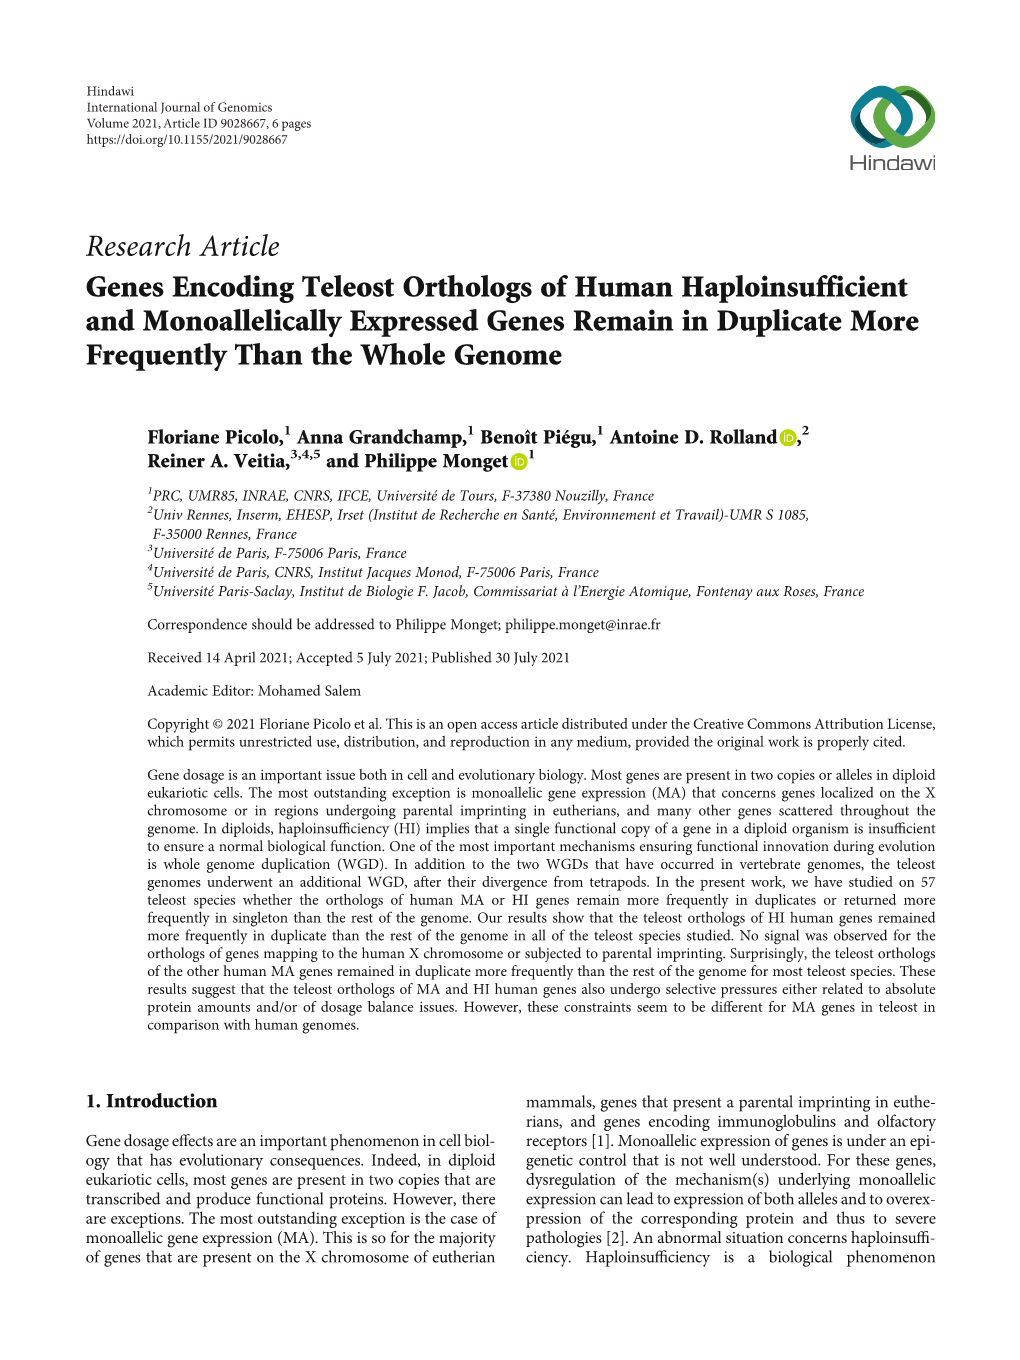 Genes Encoding Teleost Orthologs of Human Haploinsufficient and Monoallelically Expressed Genes Remain in Duplicate More Frequently Than the Whole Genome